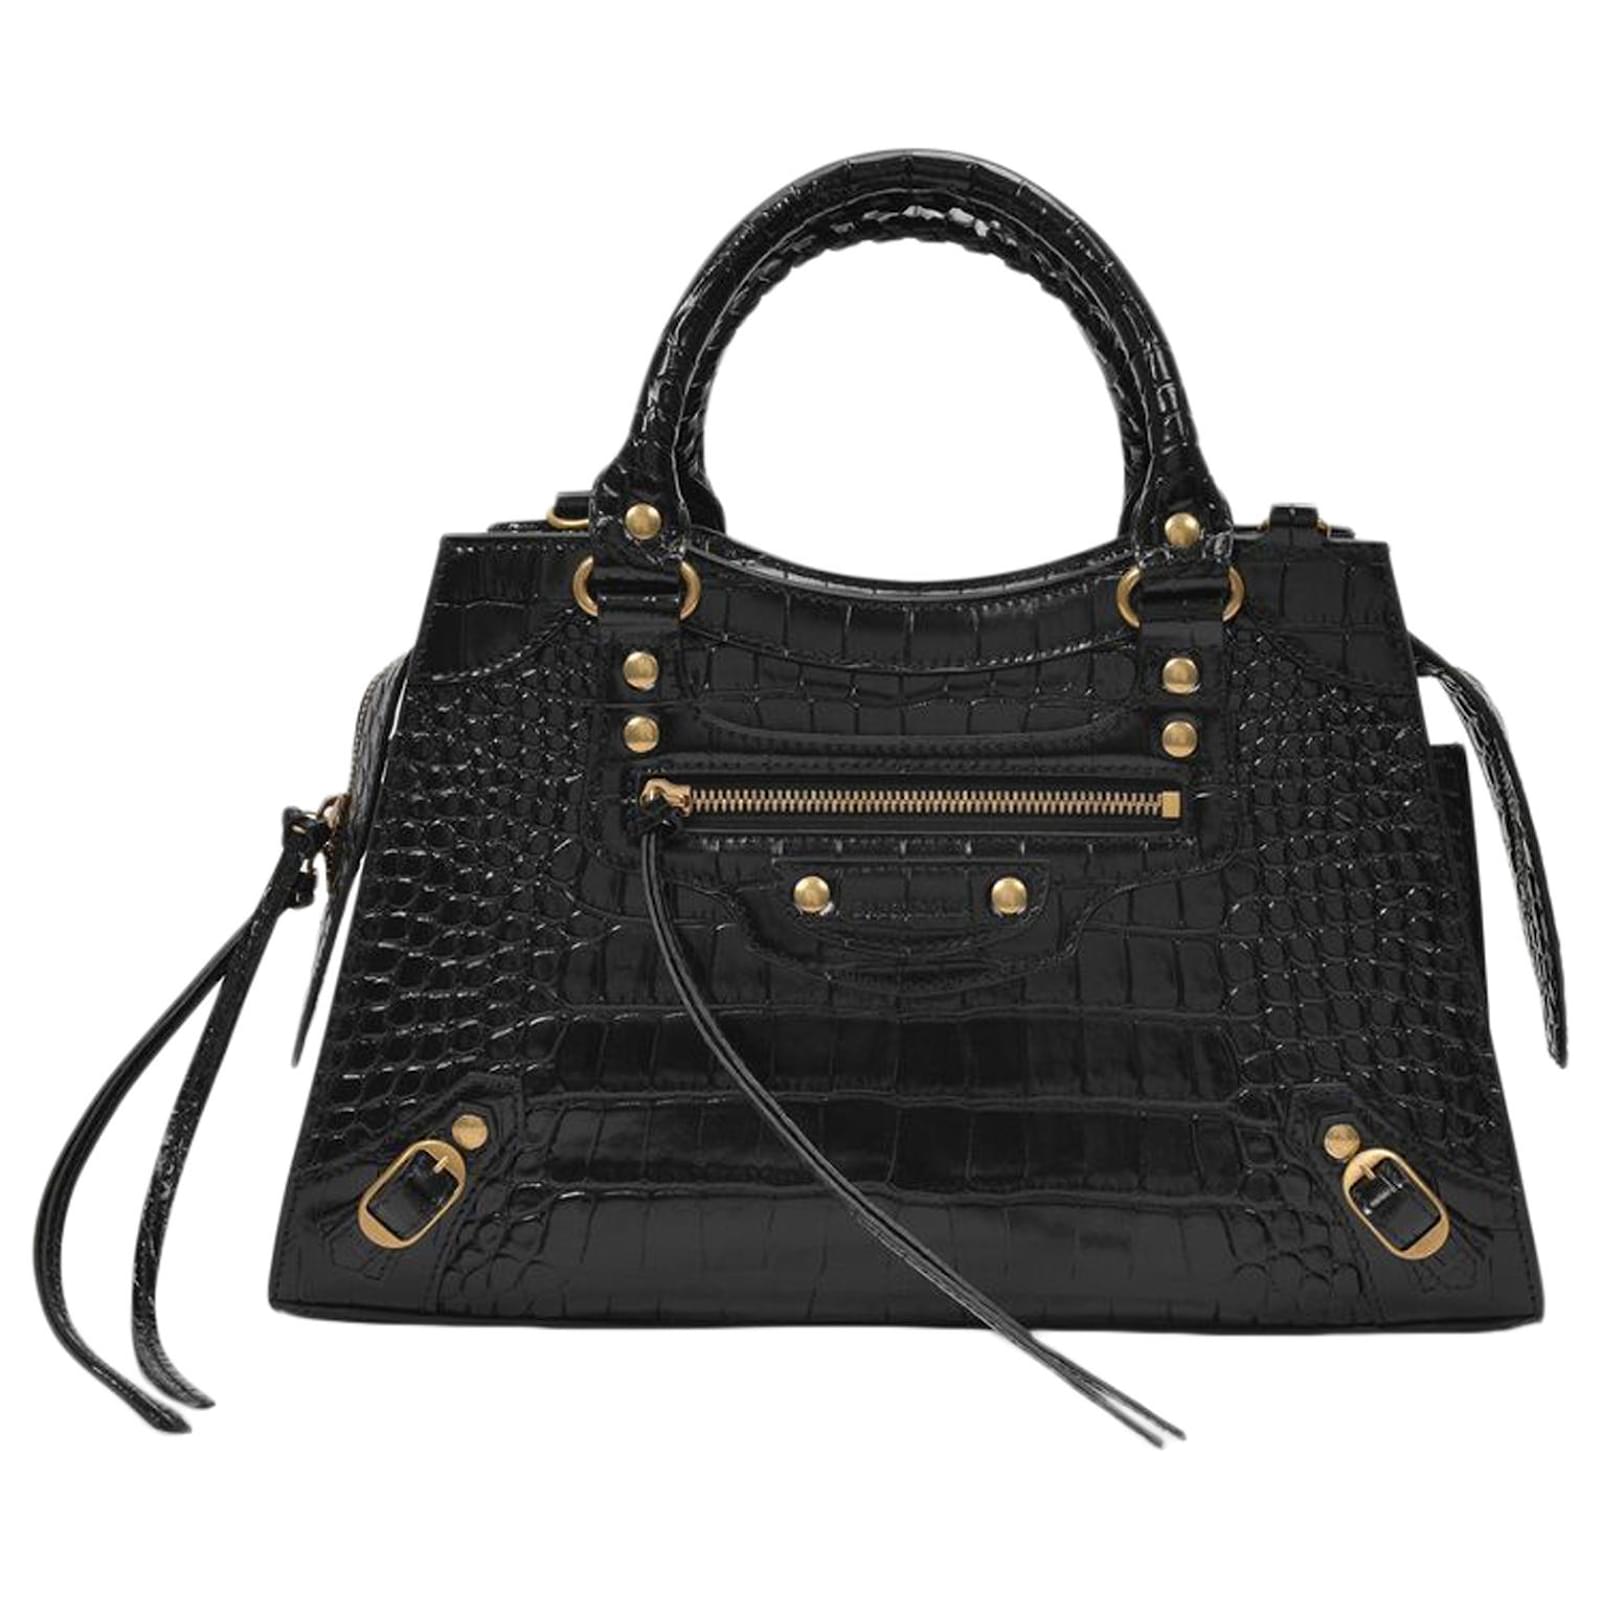 Neo Classic City S Bag in Black Crocodile Effect Leather